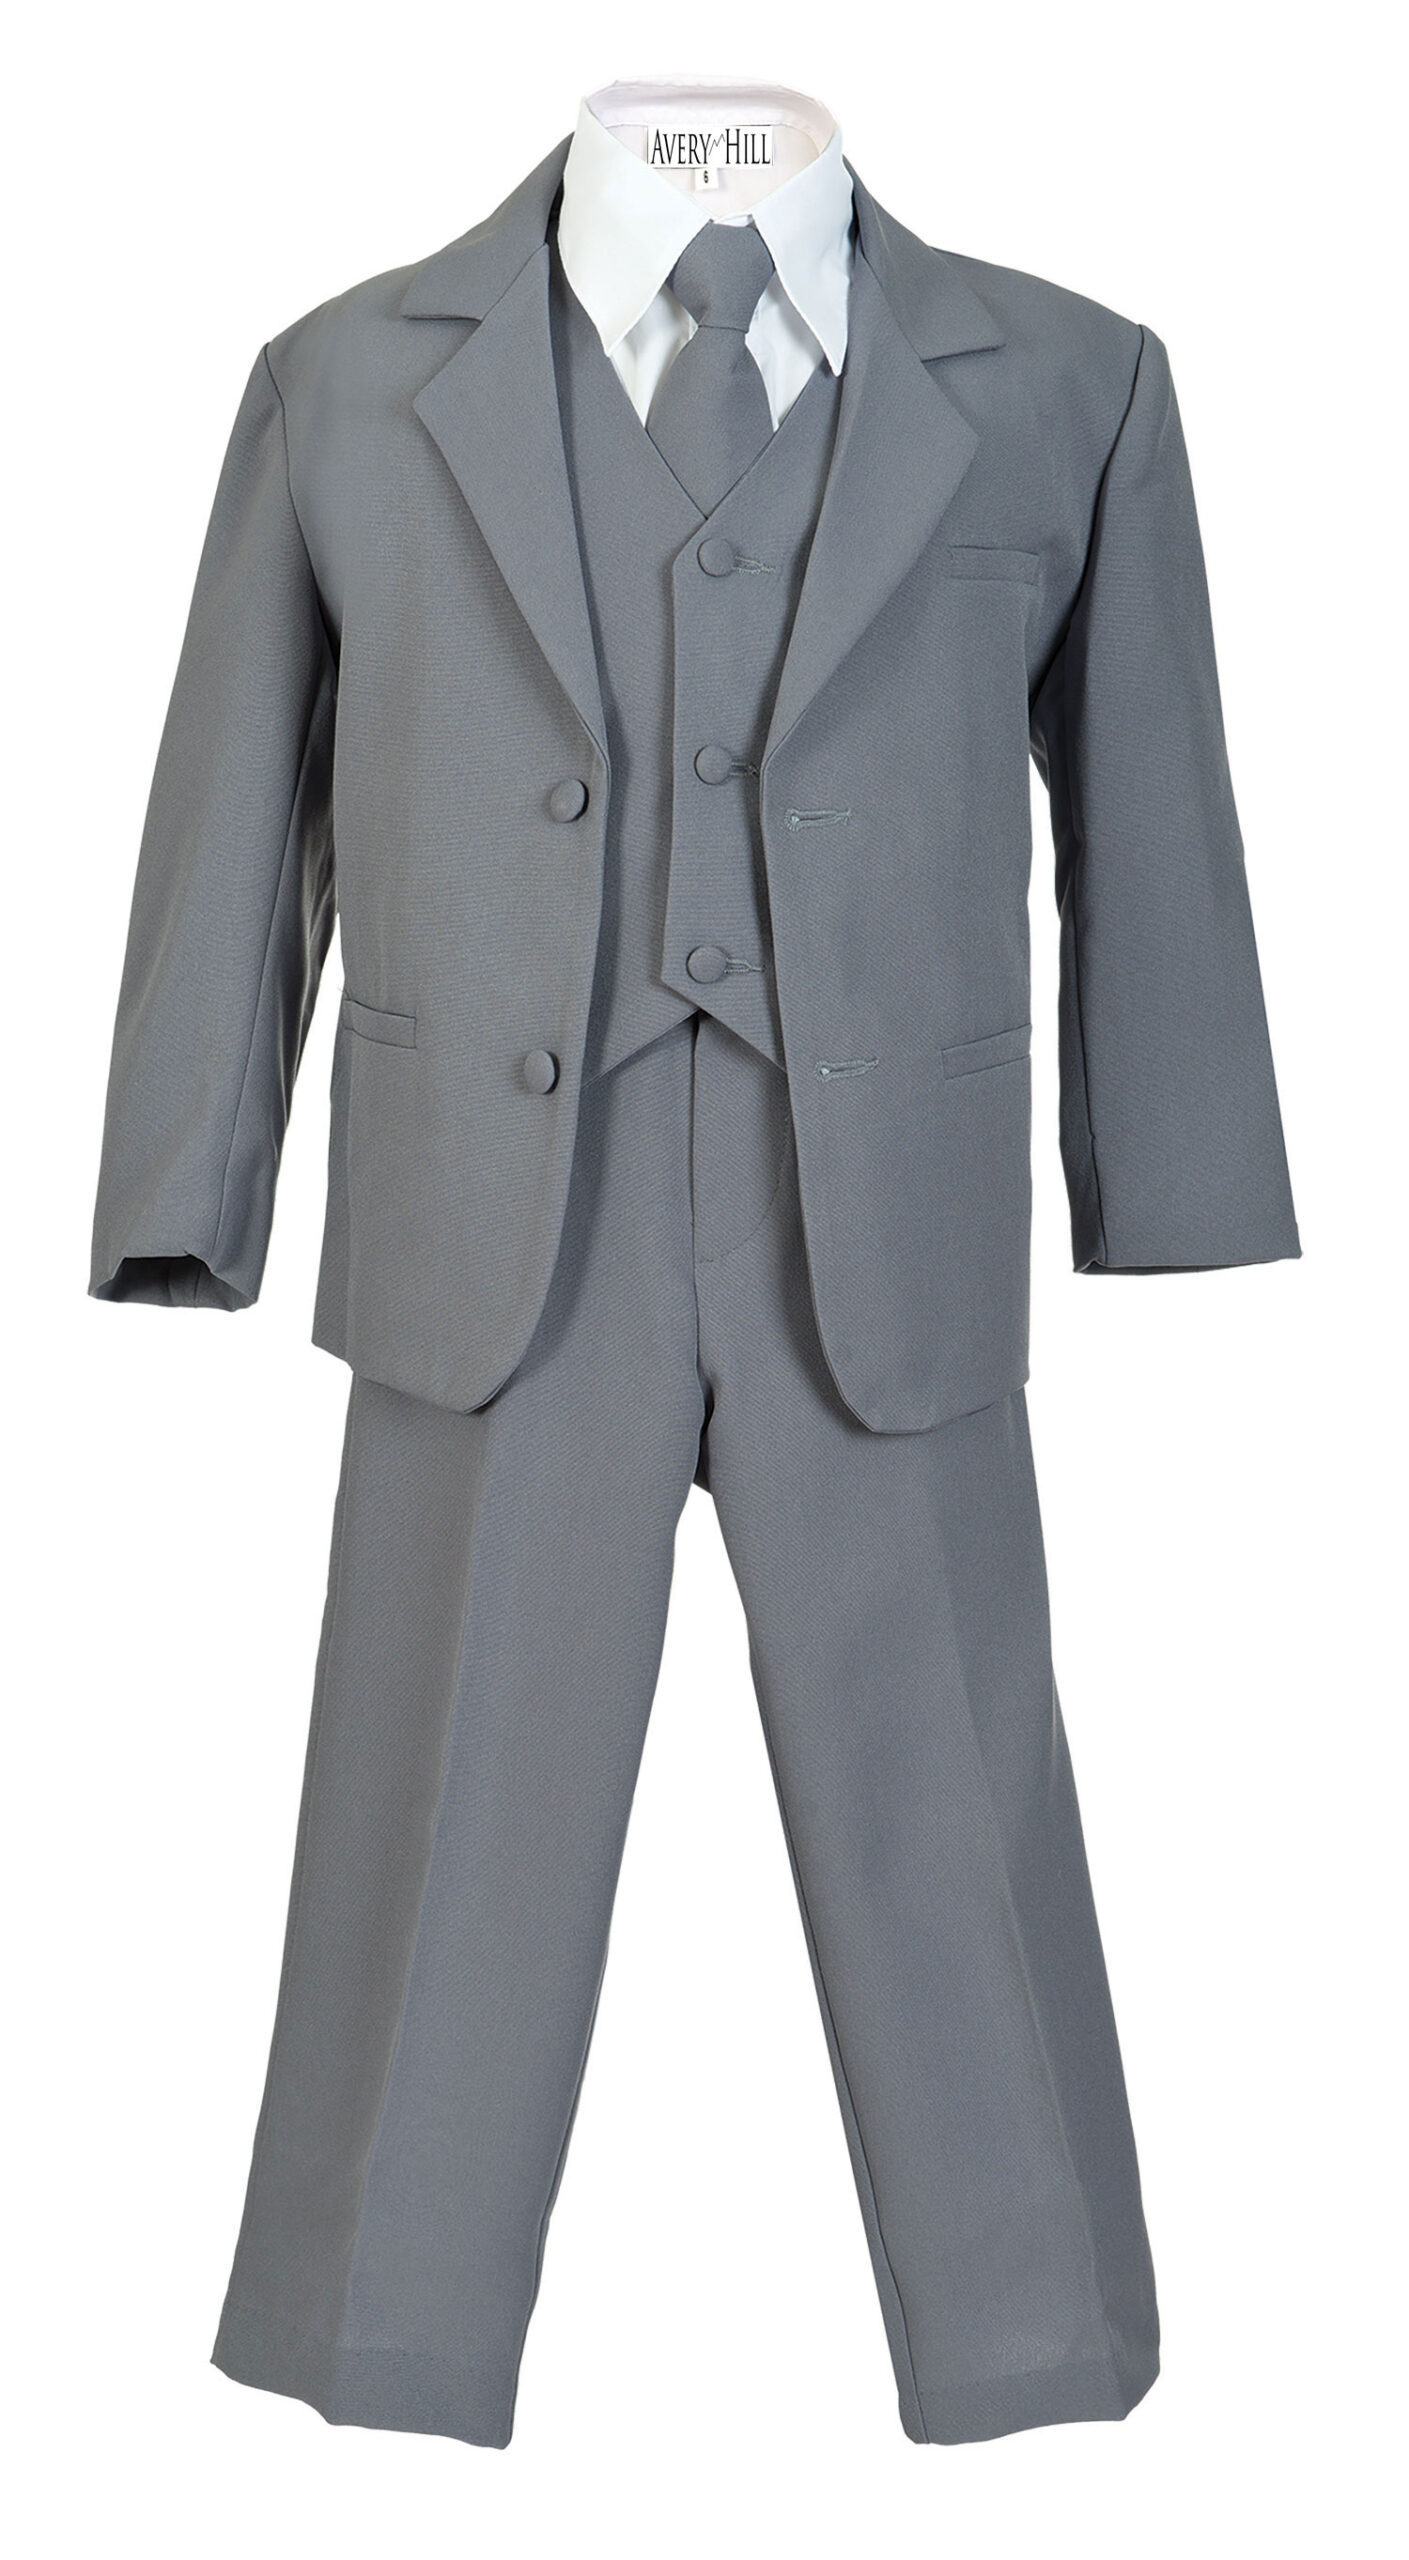 Avery Hill Boys Formal 5 Piece Suit with Shirt and Vest Slate Gray - 14